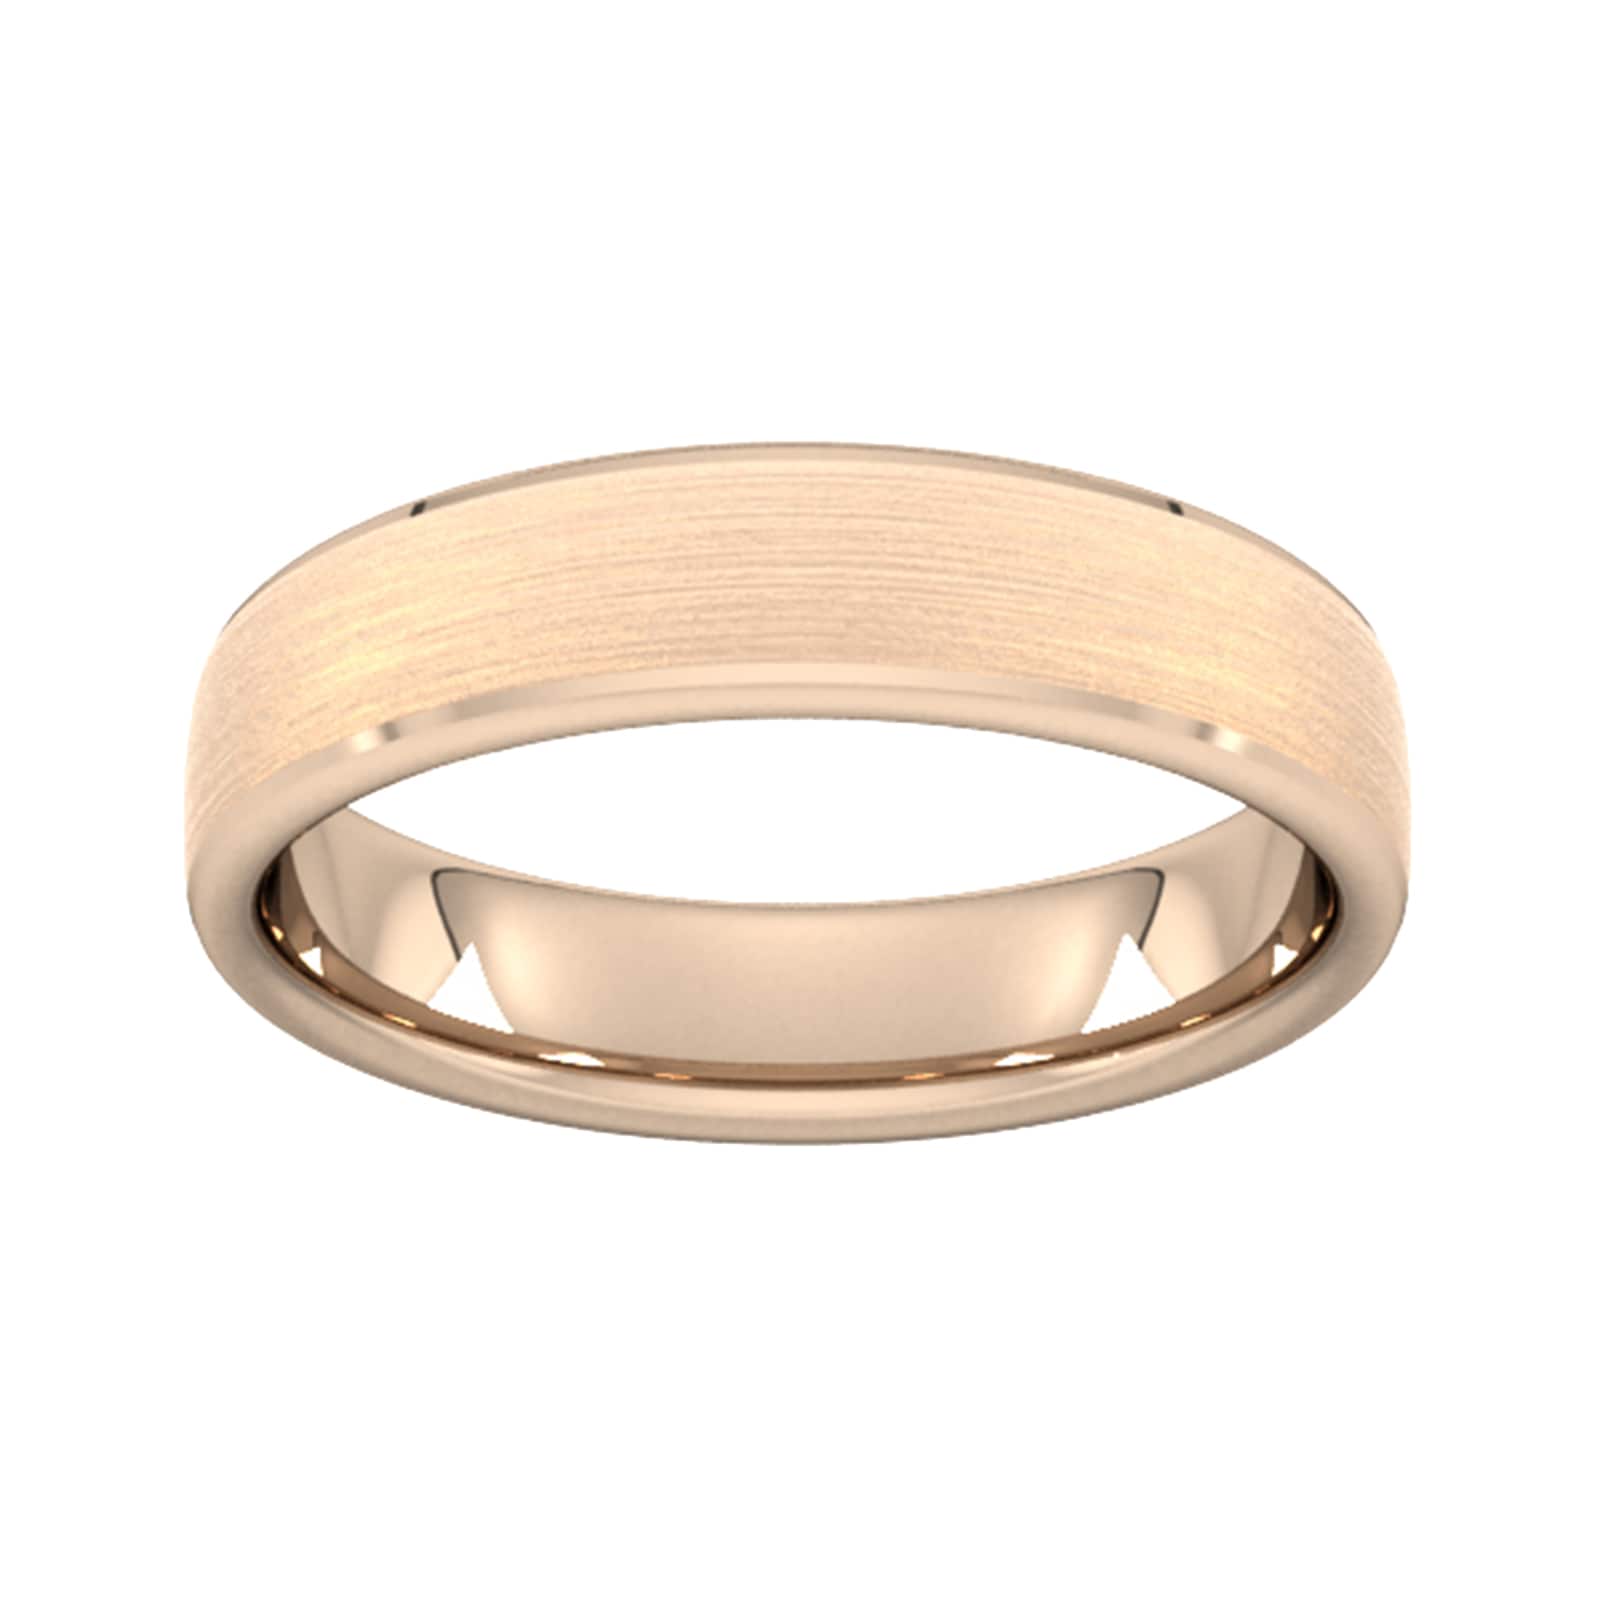 5mm D Shape Heavy Polished Chamfered Edges With Matt Centre Wedding Ring In 18 Carat Rose Gold - Ring Size Q